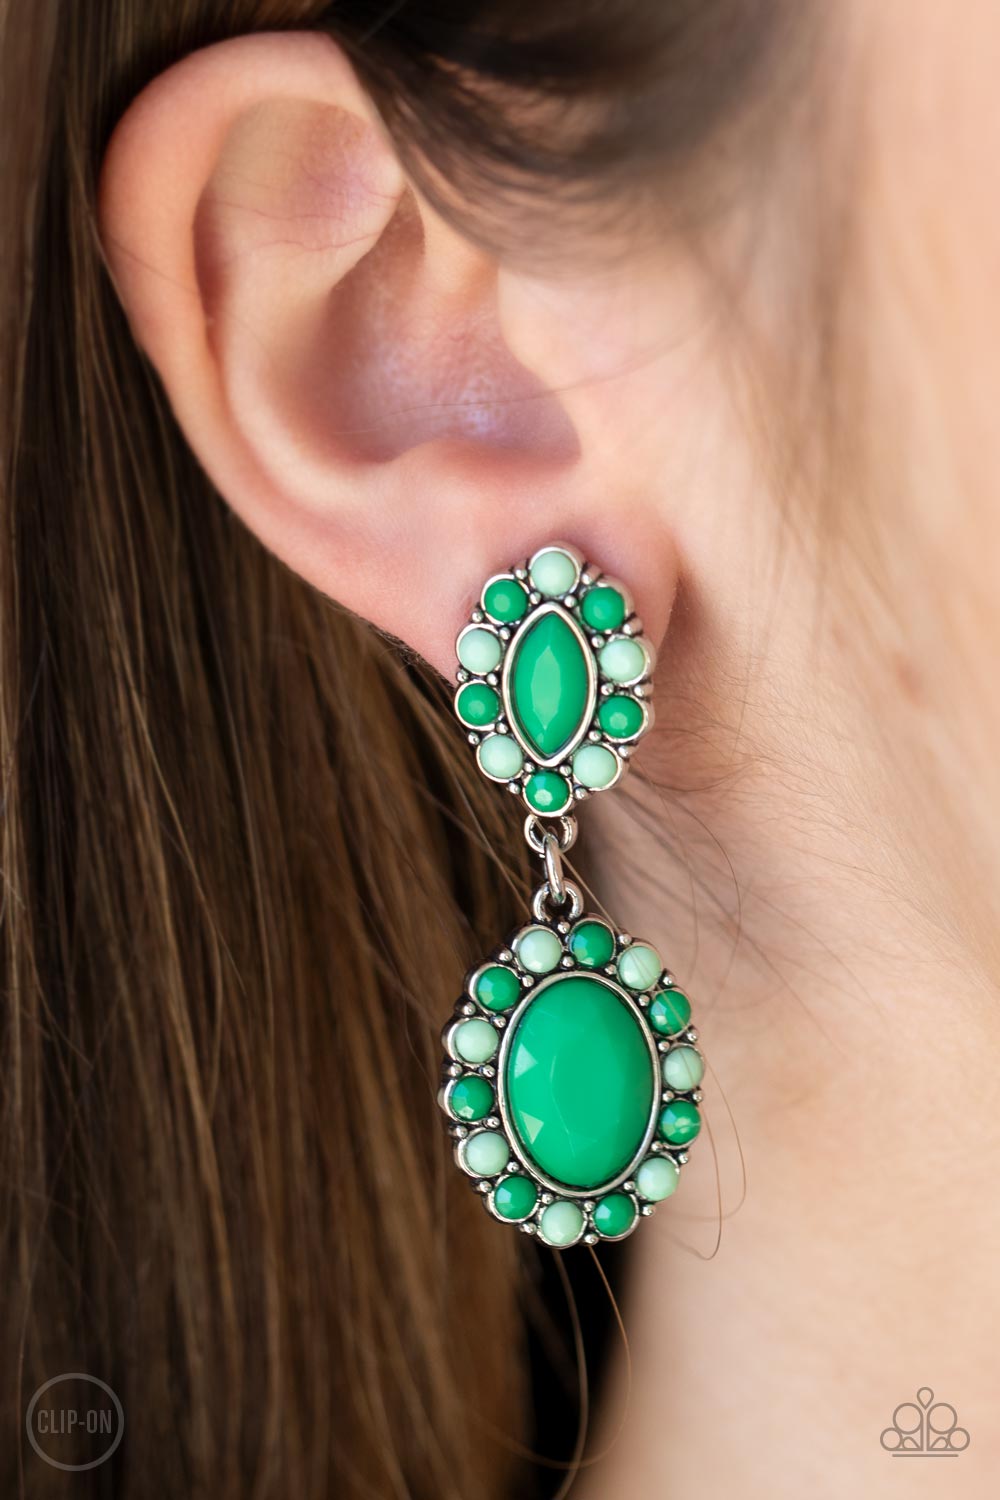 Positively Pampered - Green Earring Paparazzi Accessories